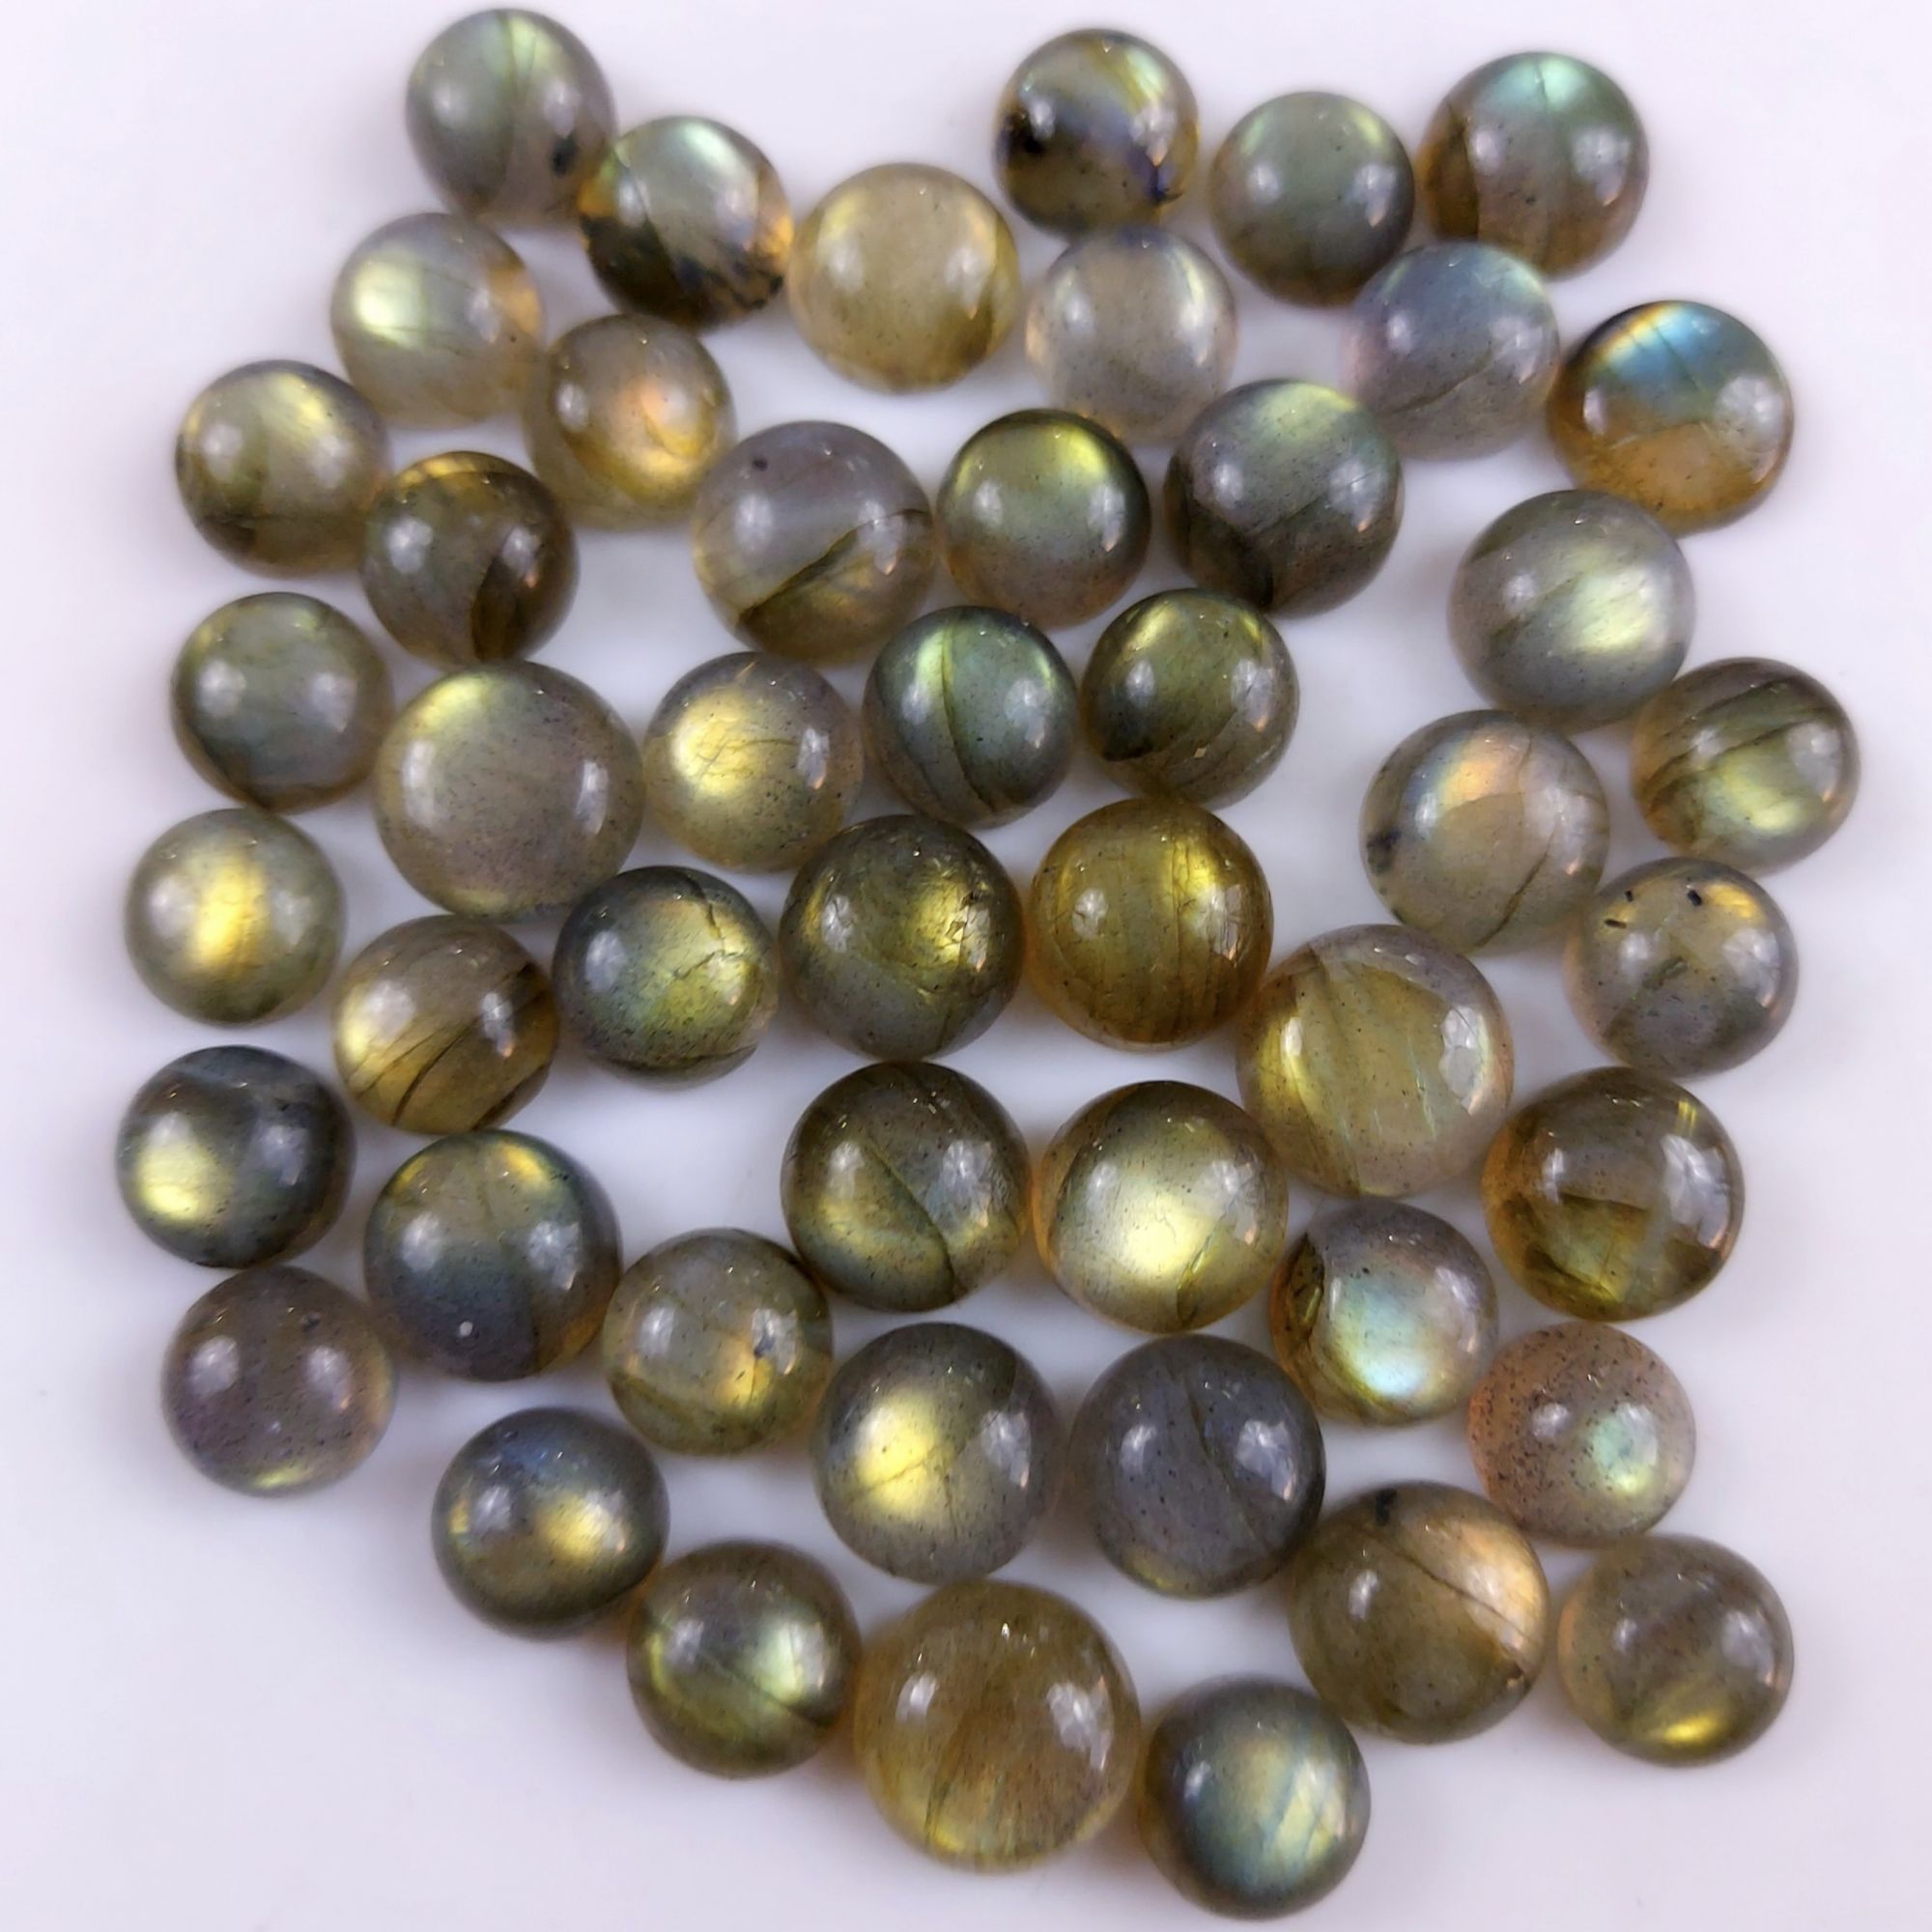 48 Pcs135Cts Natural Multifire Labradorite Loose Cabochon Round Gemstone Lot for Jewelry Making  7x7 5x5mm#1067